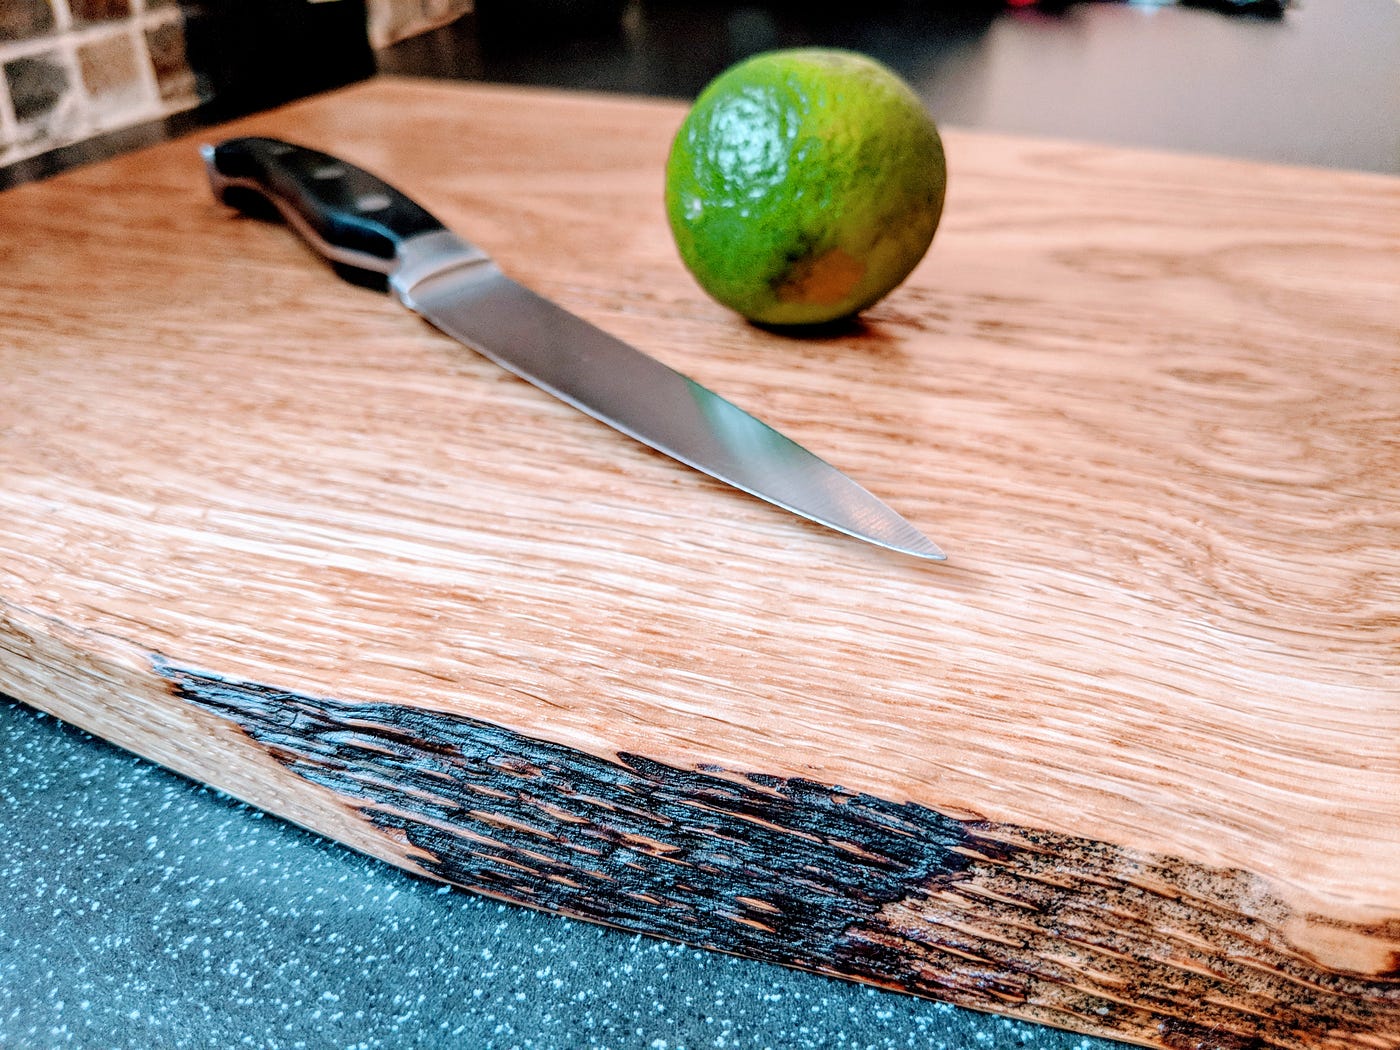 How to make an oak chopping board from scrap wood, by Michael Crinnion